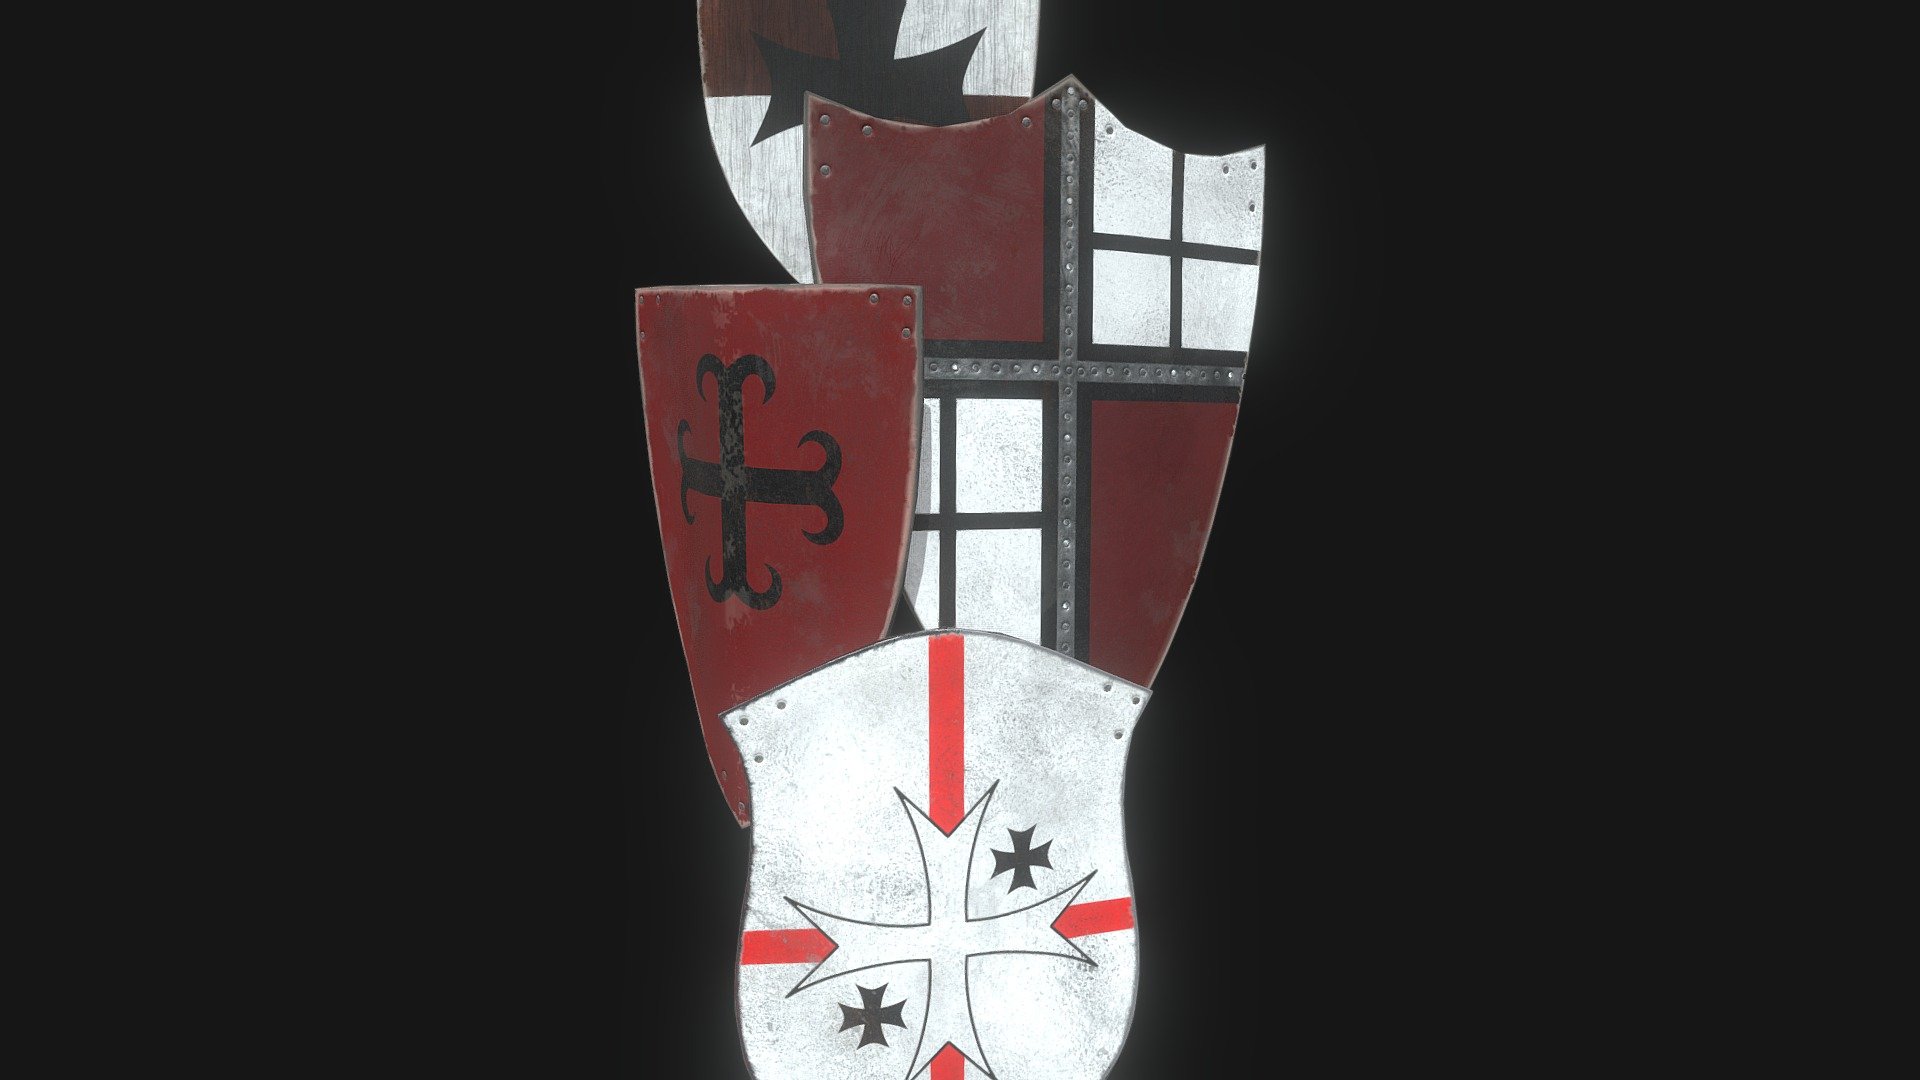 A set of Medieval Kite Shields crested with a Holy Cross!

If you buy any of my medieval Kite shields, the texture sets are interchangeable across all 4 models!

Designed for games in Low-poly PBR including Albedo, Normal, Metallic, AO, and Roughness 4K textures.

Horned Kite - 568 Triangles. Flattop Kite - 496 Triangles. Wooden Small Kite - 532 Triangles. Heater Shield - 640 Triangles 3d model